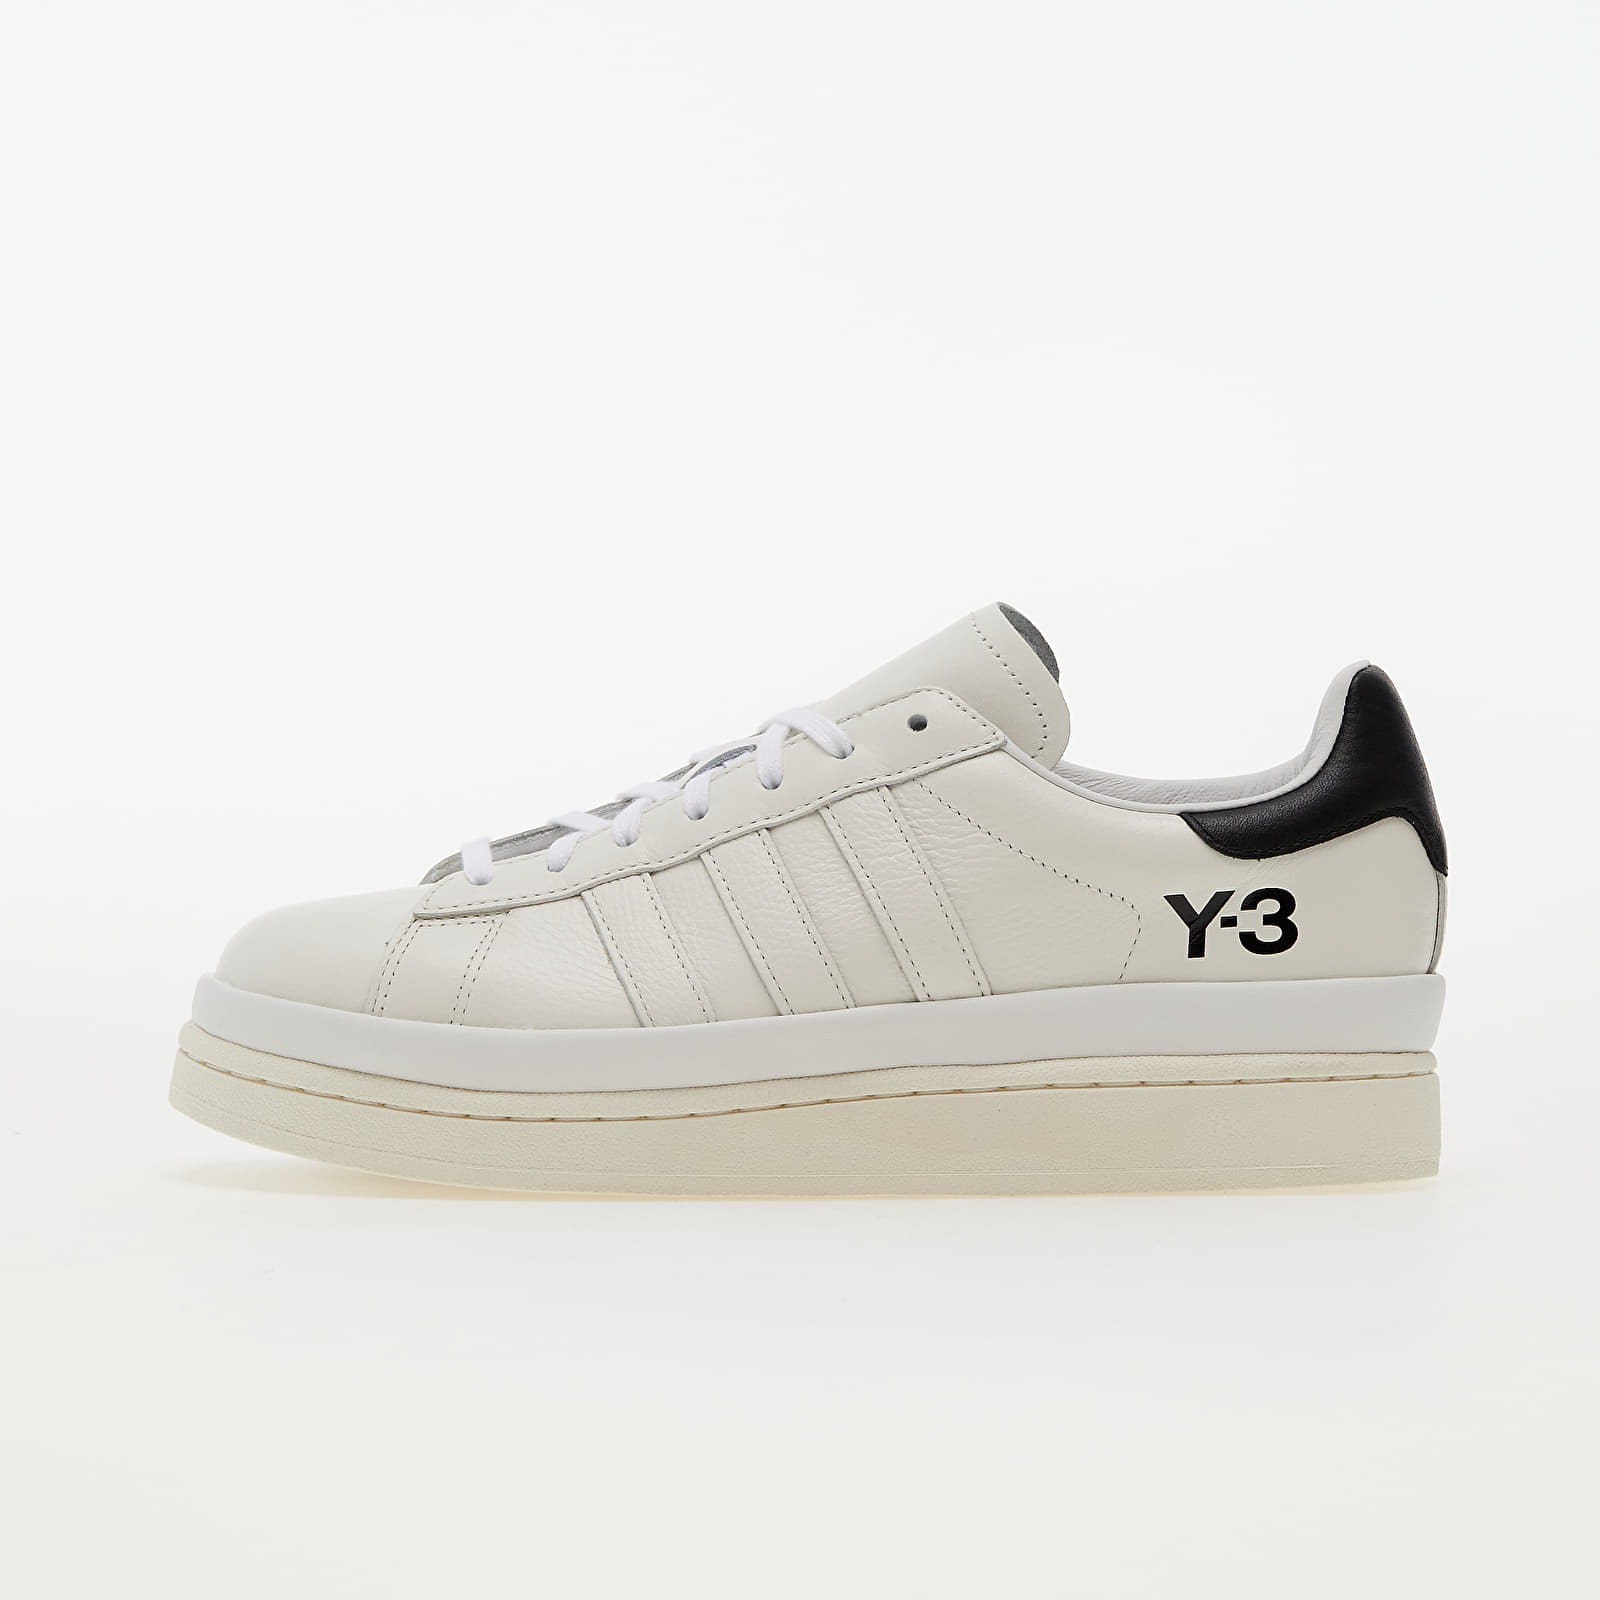 Chaussures et baskets homme Y-3 Hicho Core White/ Black/ Off White